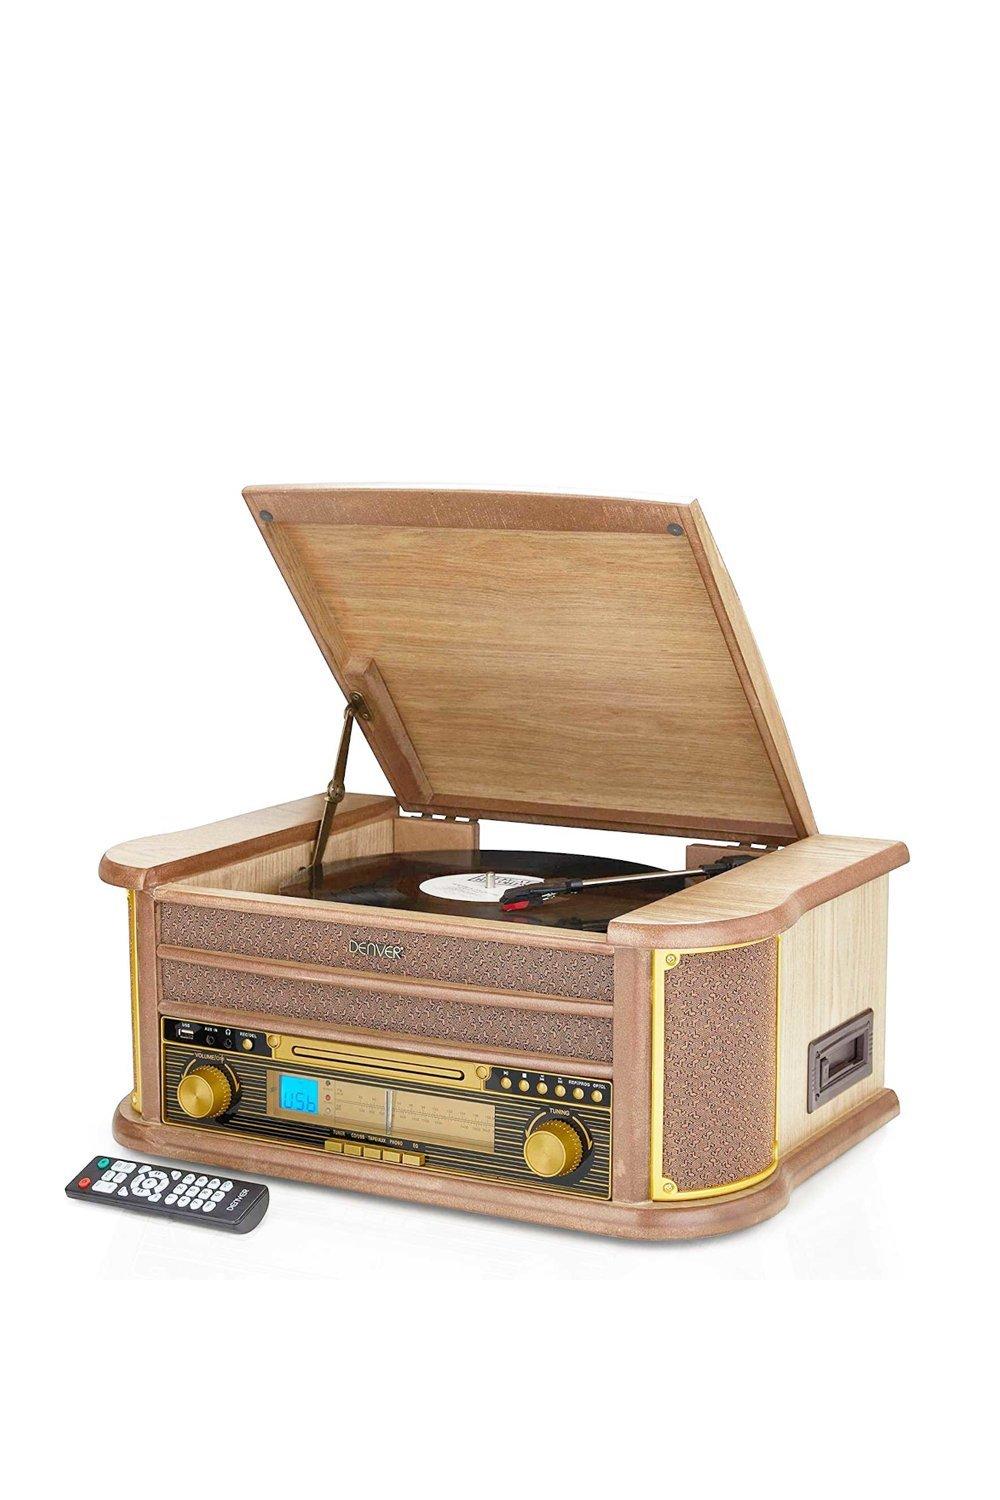 Denver Vintage Retro 8-IN-1 HIFI Stereo System with Vinyl Record & CD Player|light brown